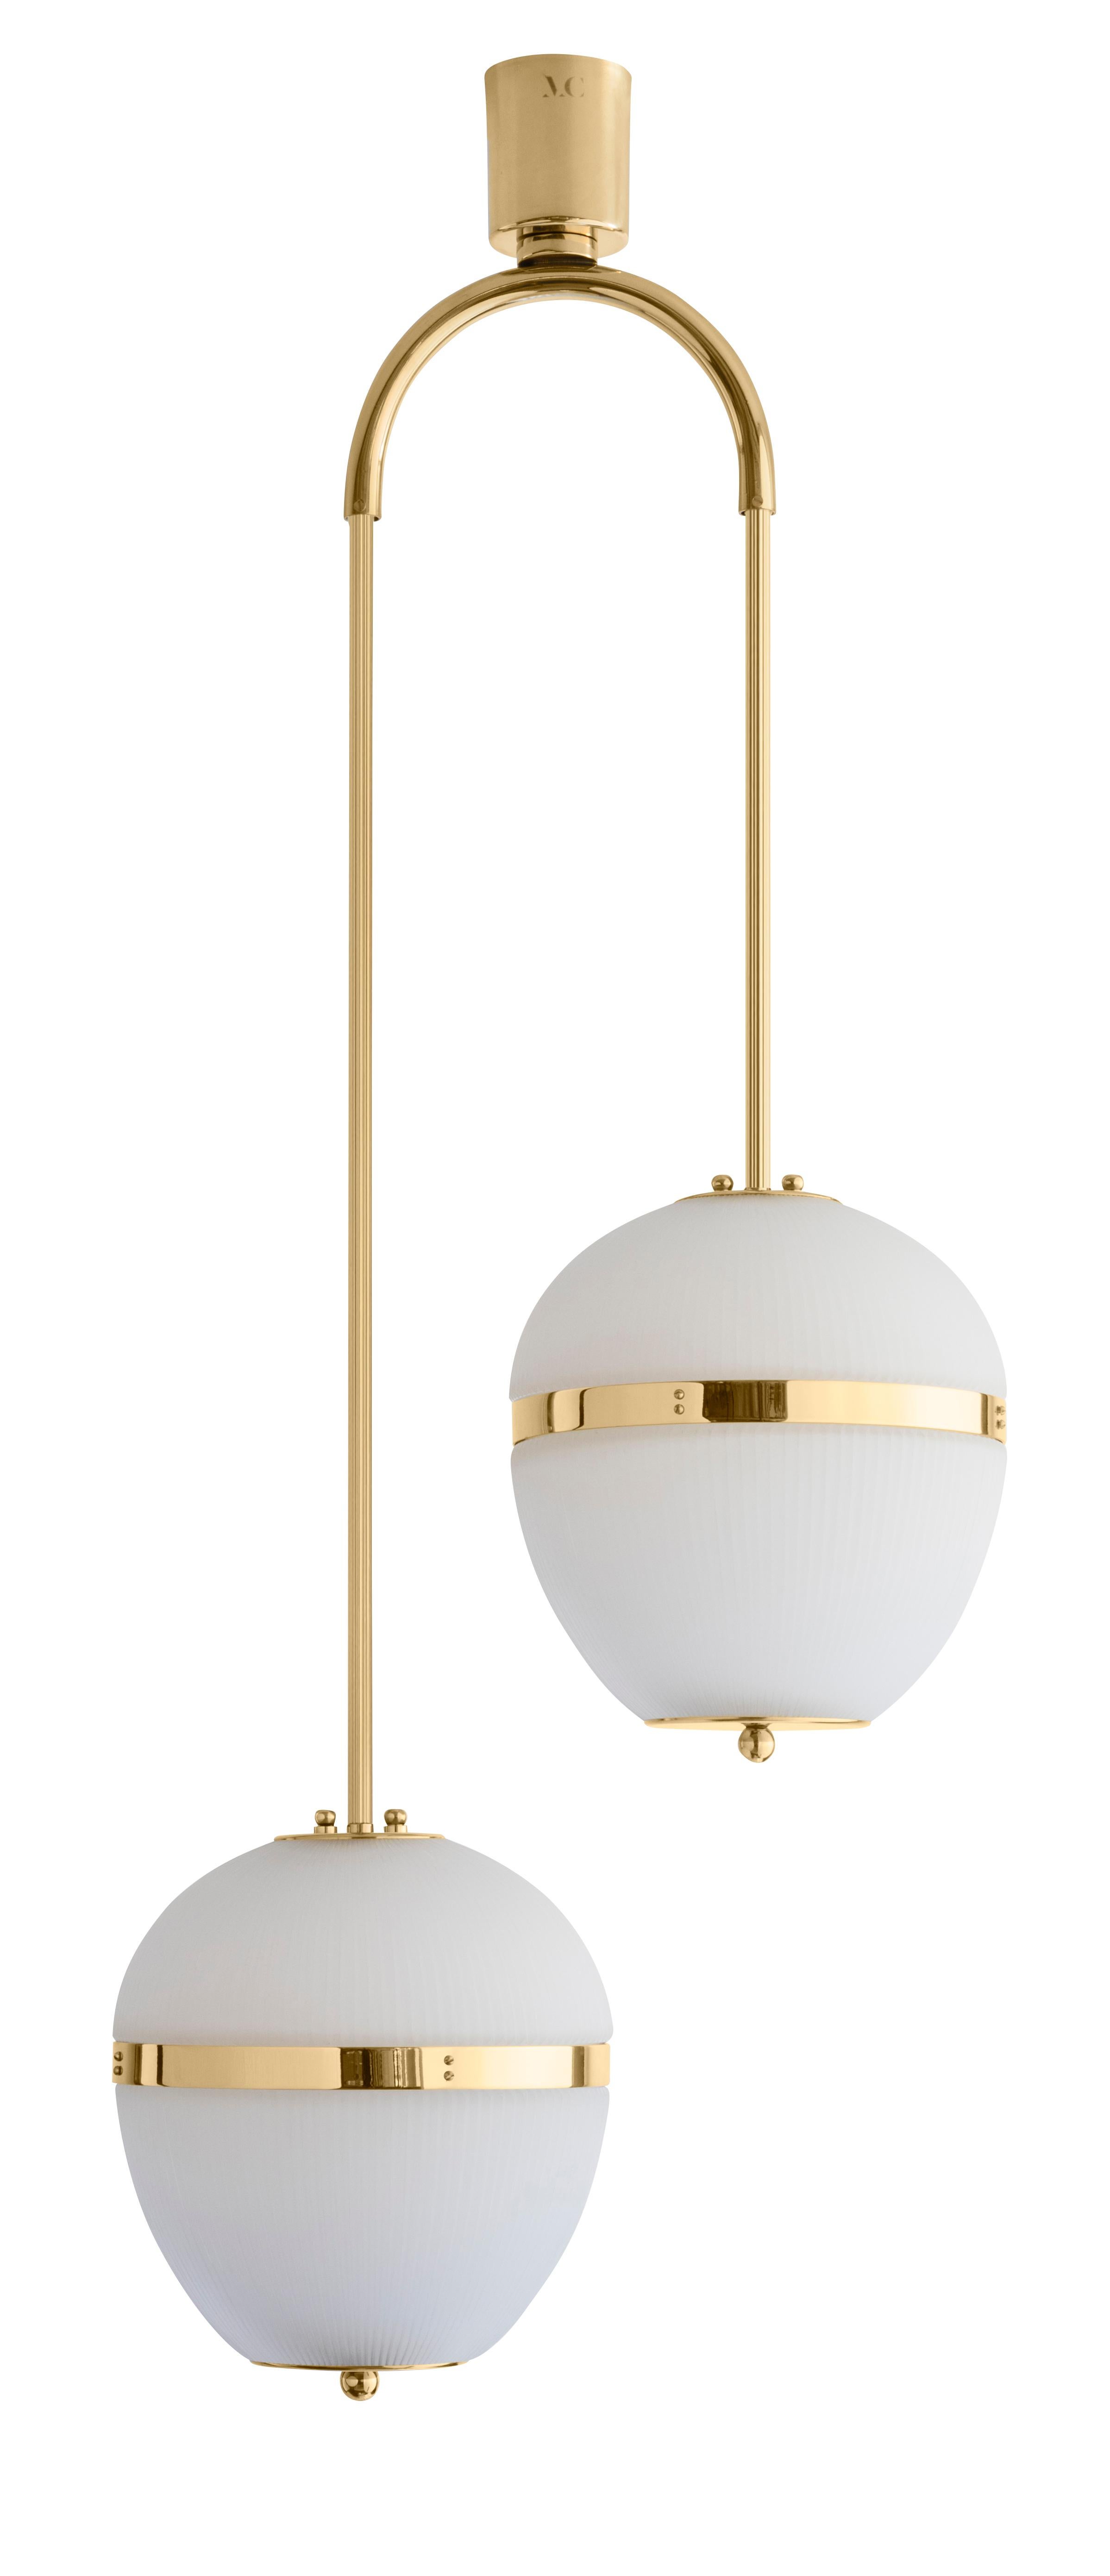 Double chandelier China 02 by Magic Circus Editions
Dimensions: H 112 x W 43.3 x D 25 cm
Materials: Brass, mouth blown glass sculpted with a diamond saw
Colour: soft rose

Available finishes: Brass, nickel
Available colours: enamel soft white,